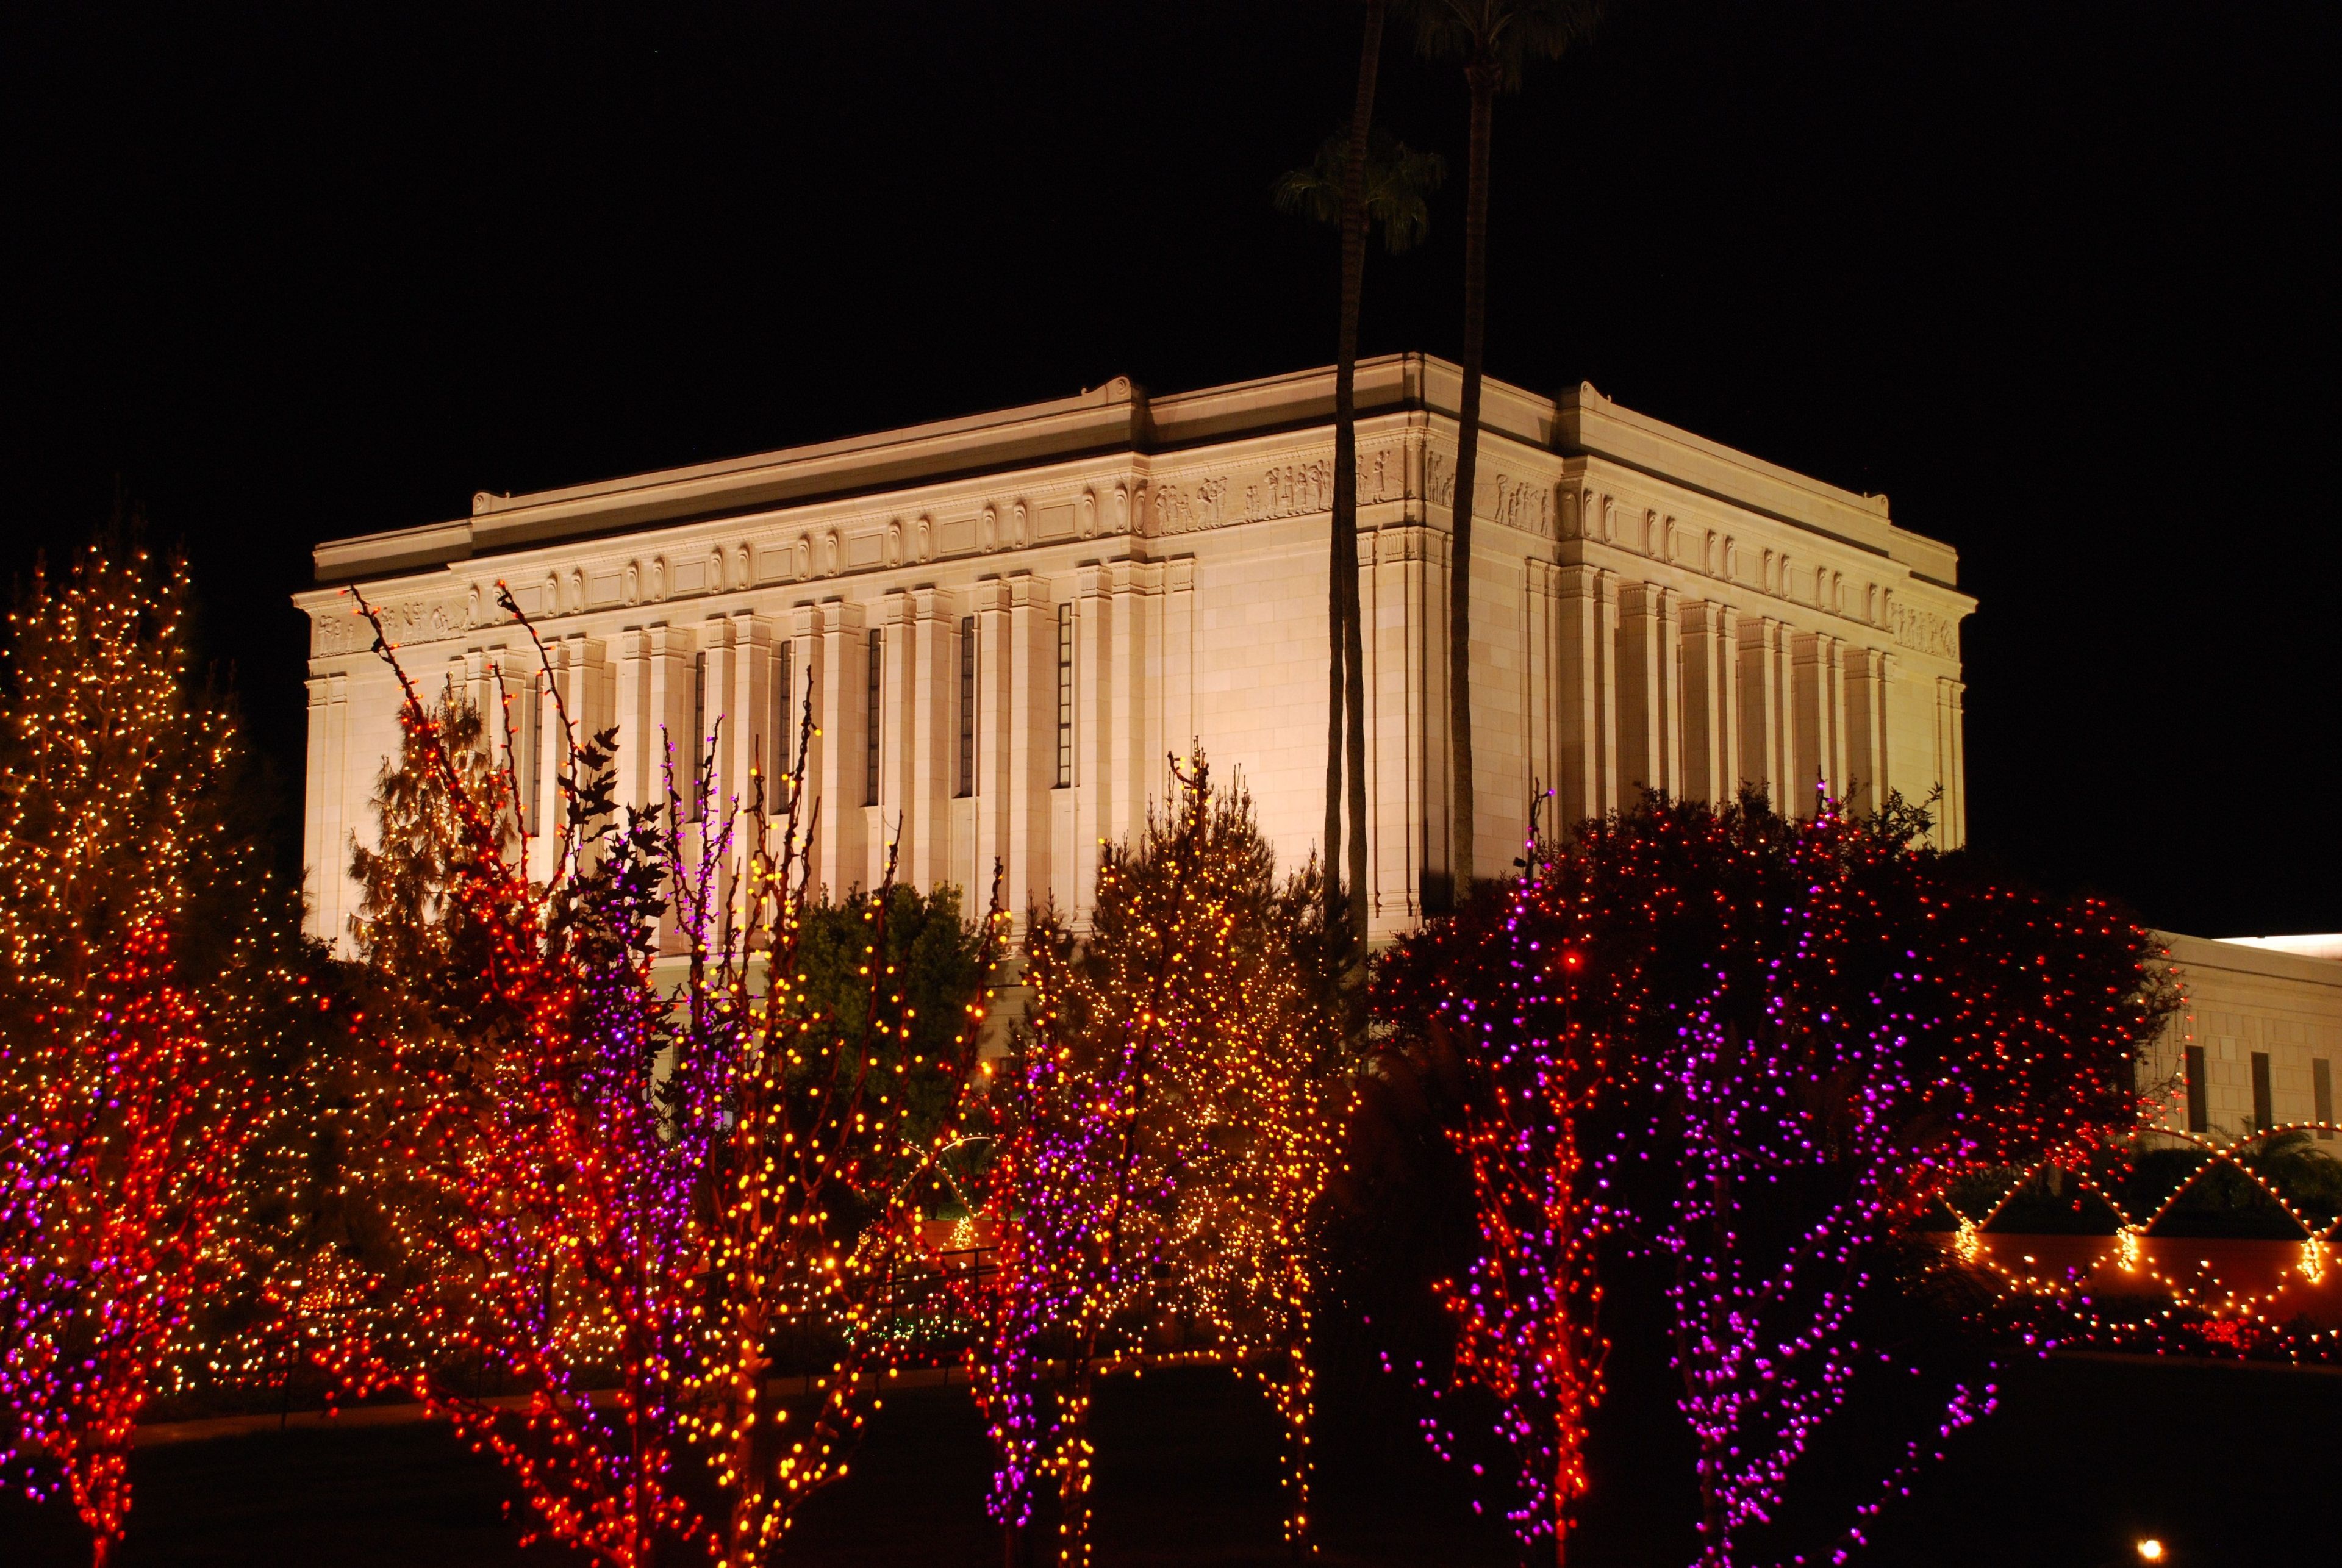 The Mesa Arizona Temple during Christmas, including the exterior of the temple.